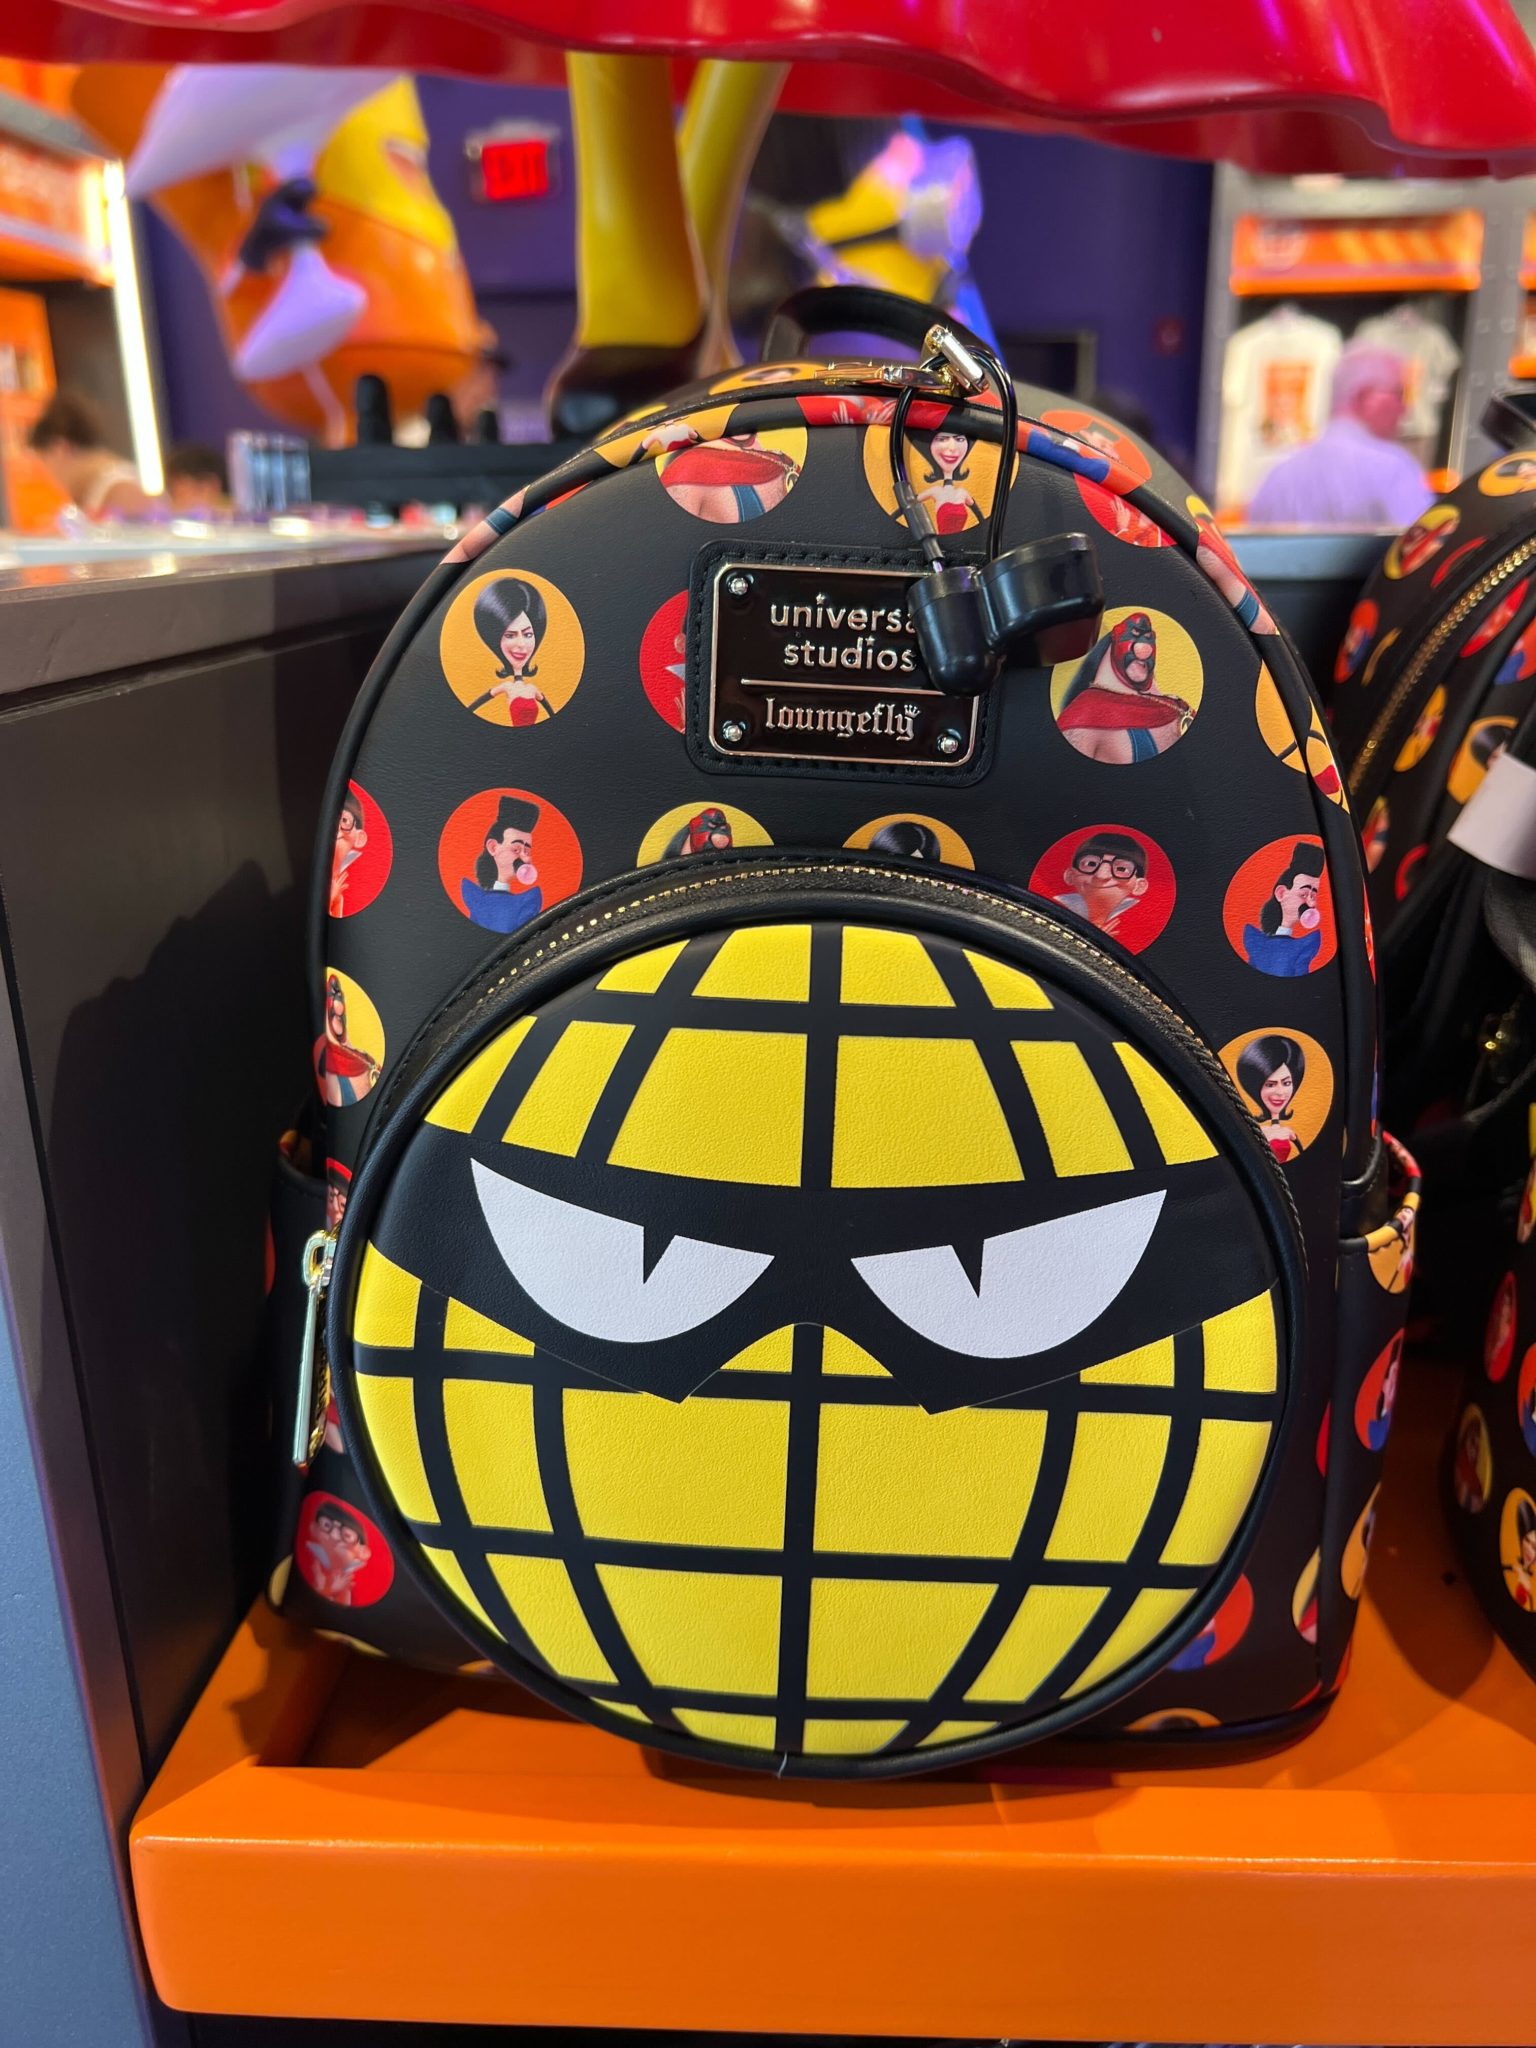 NEW: Minions Loungefly Bags Bring the Style To Universal Parks Florida ...